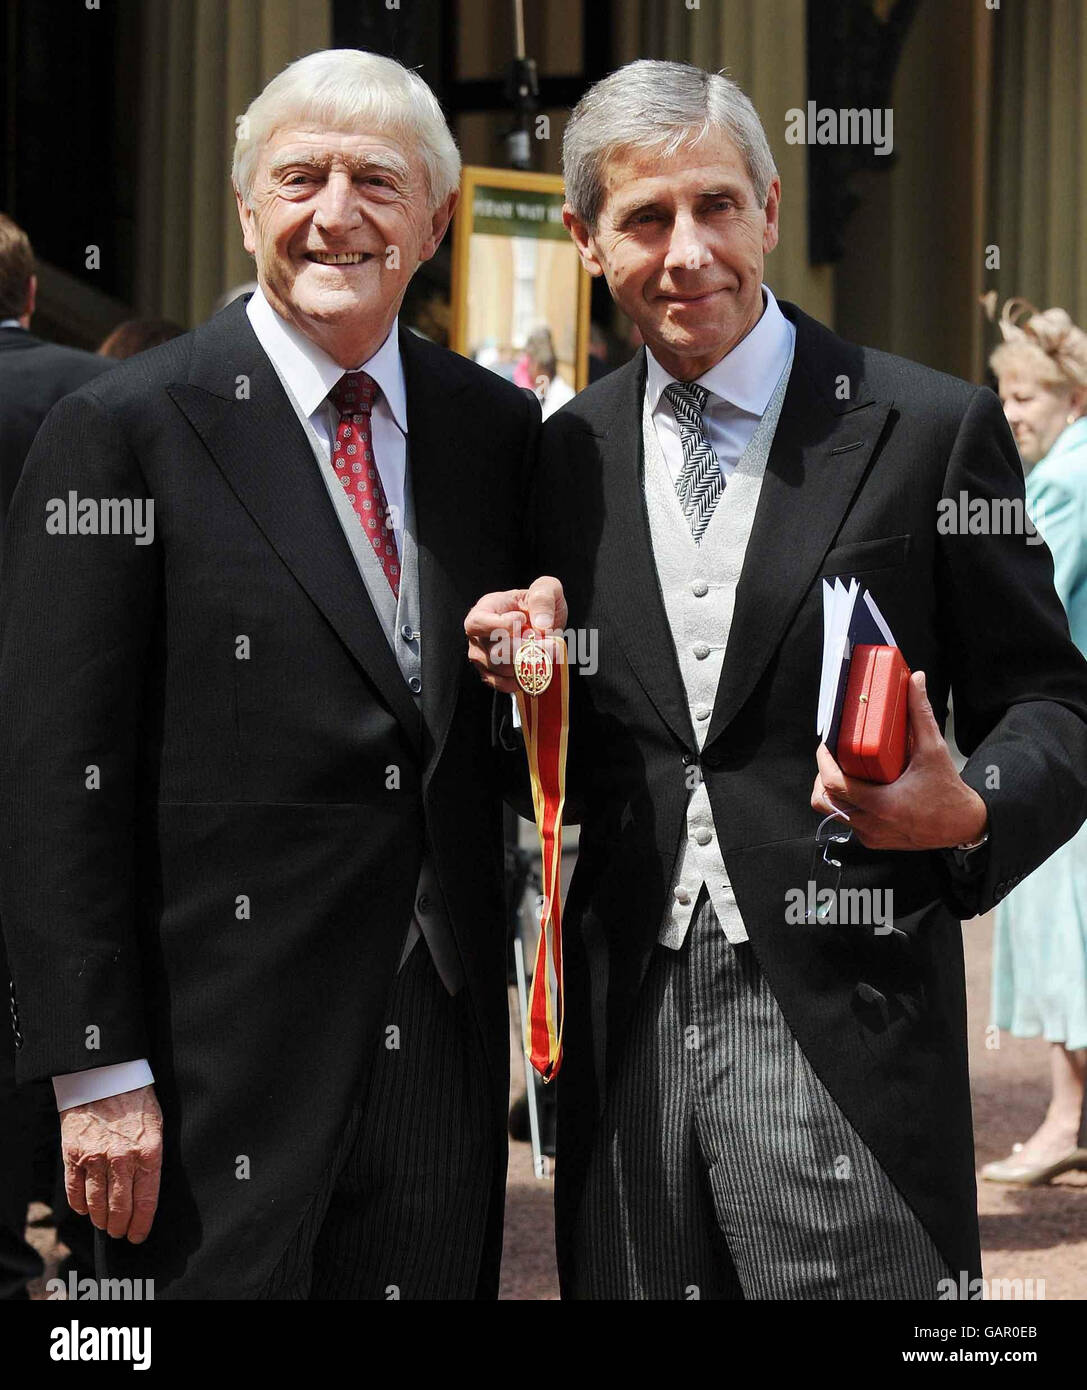 Sir Michael Parkinson (left) and Sir Stuart Rose, CEO of Marks and Spencer, after they collected their Knighthoods from Britain's Queen Elizabeth II at Buckingham Palace, London. Stock Photo